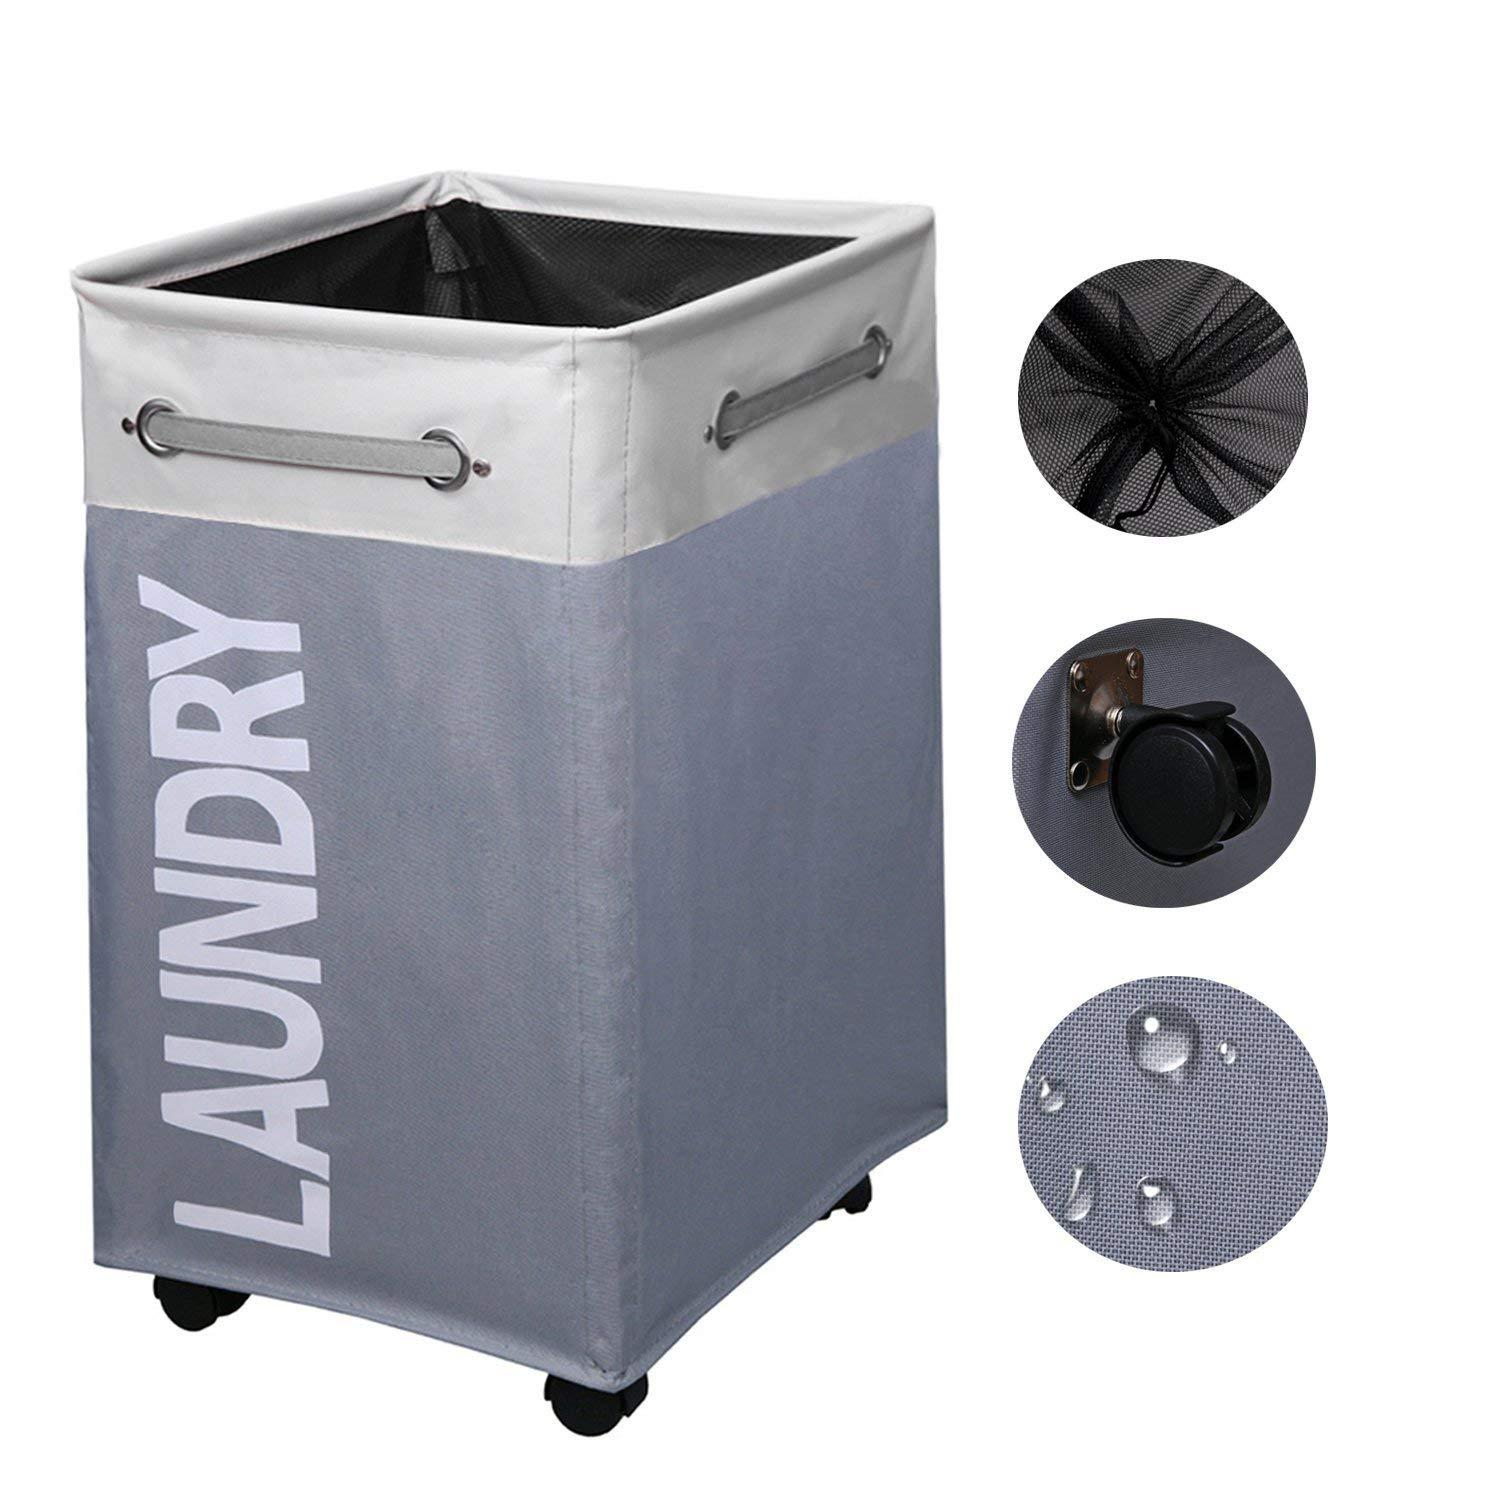 2019 Cleversion Collapsible Laundry Basket With Handles Splicing regarding dimensions 1488 X 1488